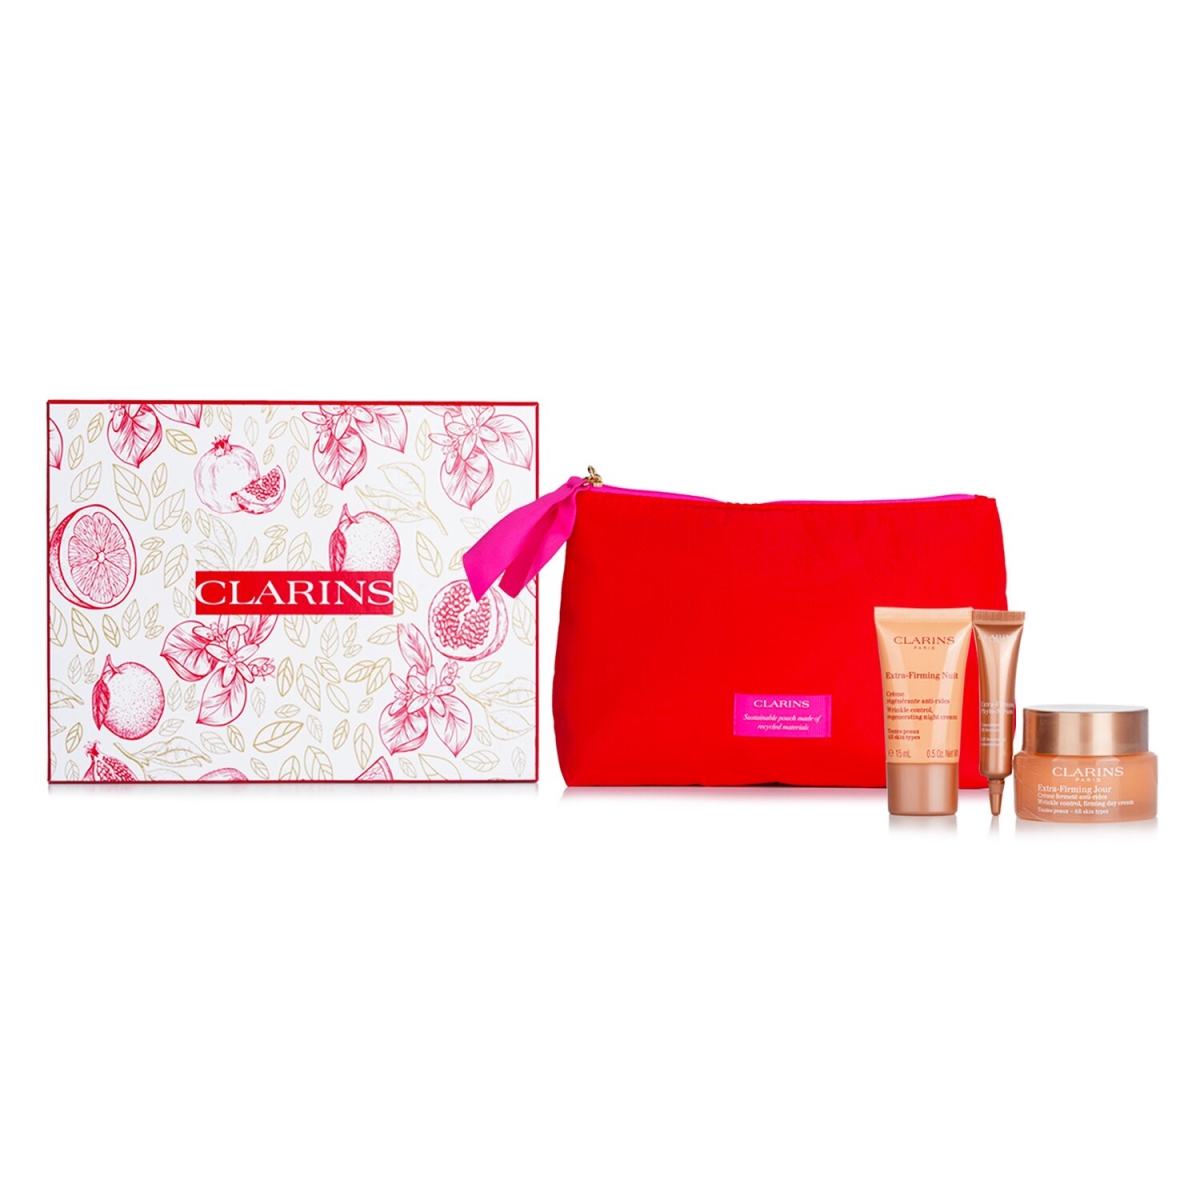 282217 Extra Firming Gift Set - 3 Piece with 1 Bag -  Clarins